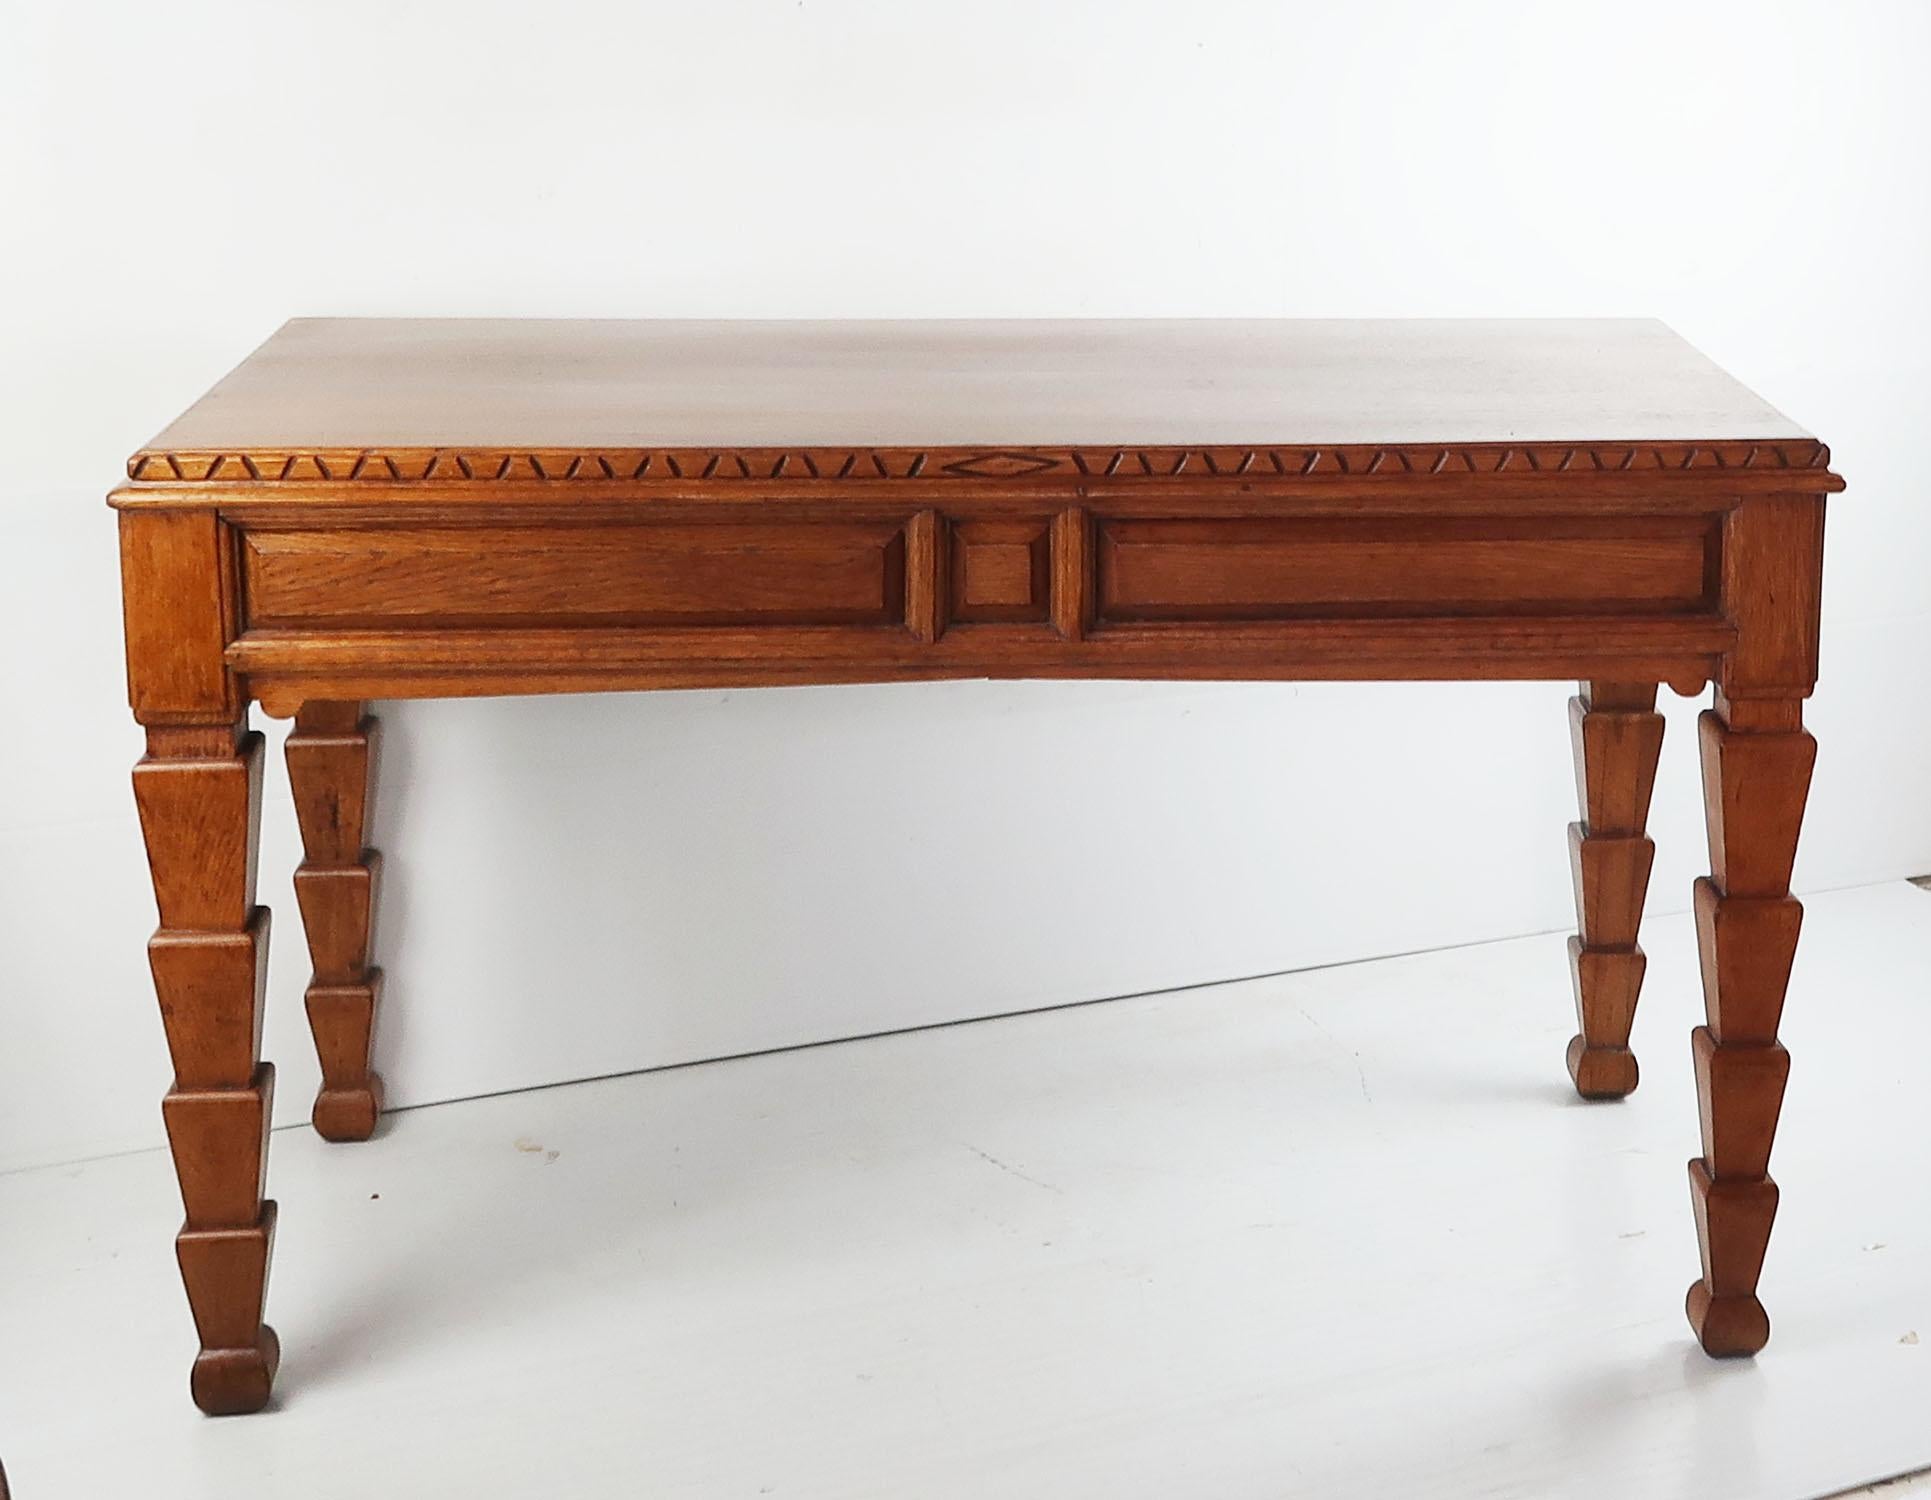 Aesthetic Movement Antique Aesthetic Style Oak Library Table or Desk, circa 1900